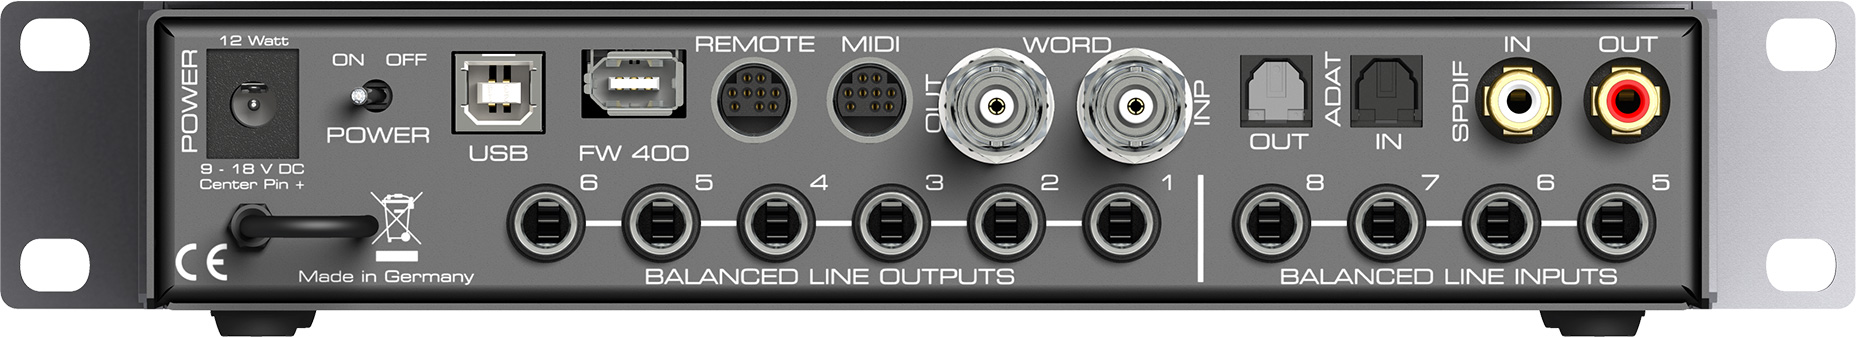 RME Fireface UCX audio interface (Discontinued)